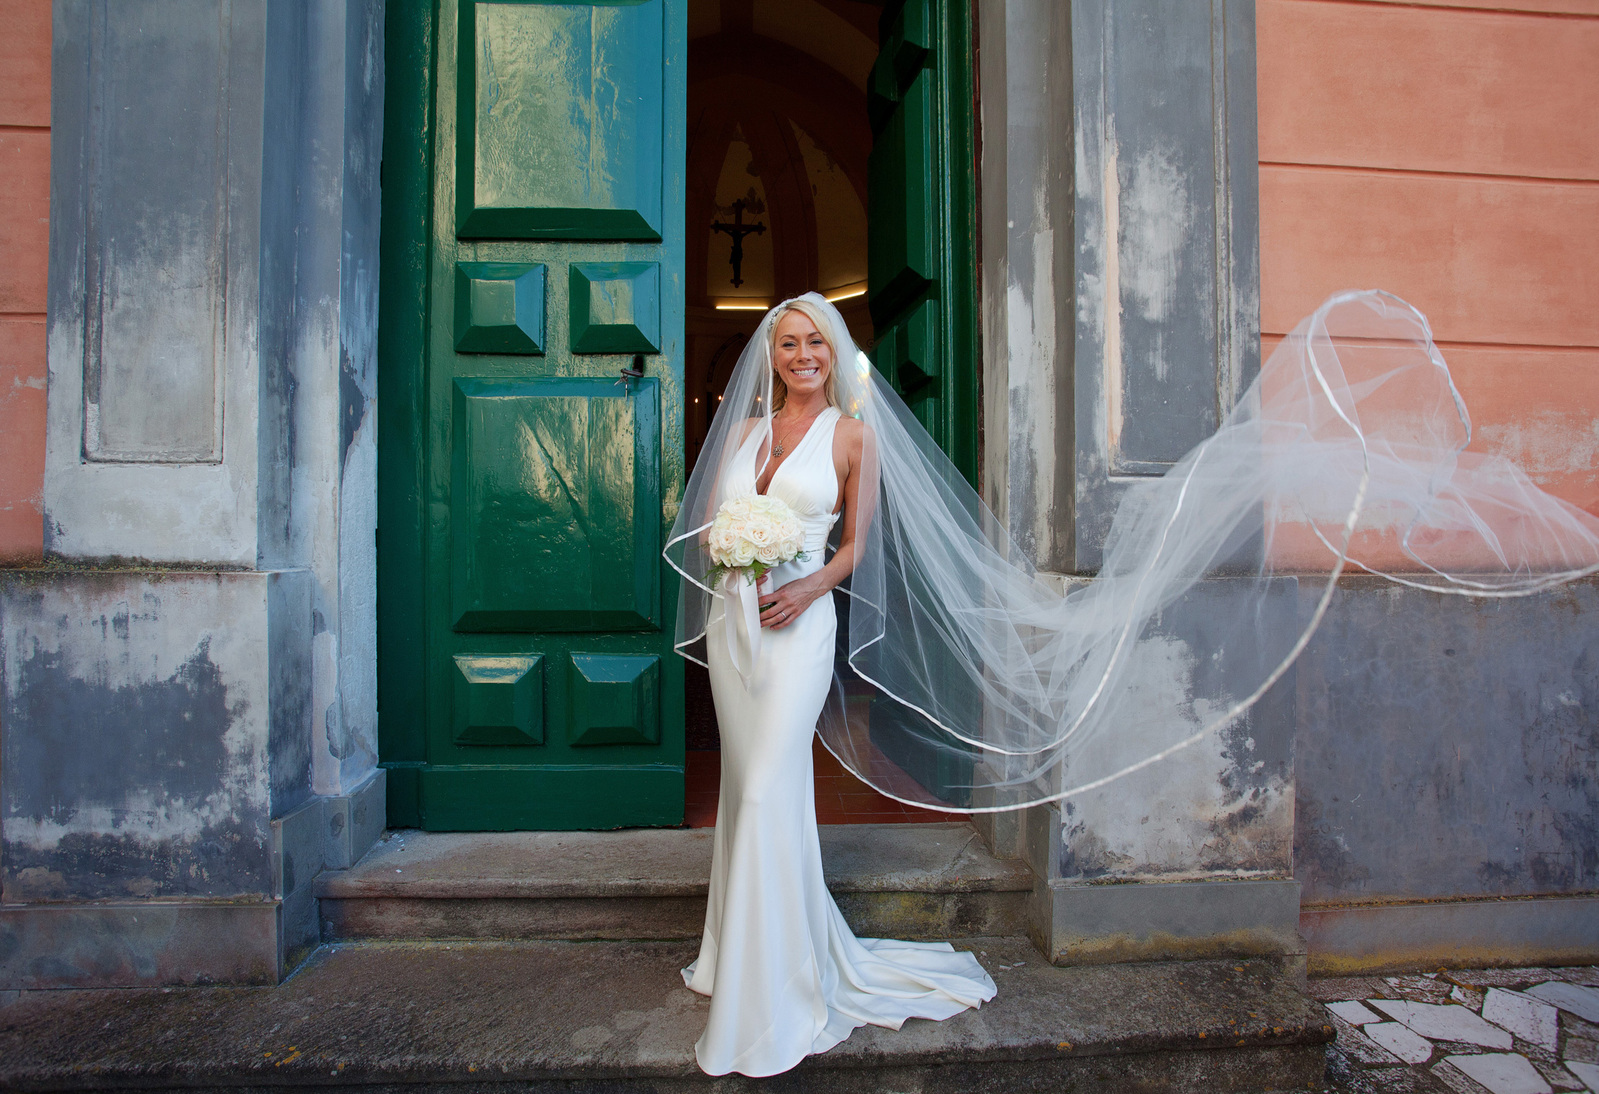 Smiling blonde bride with veil blowing in front of large green doors Location wedding Italy relaxed fun style wedding photography